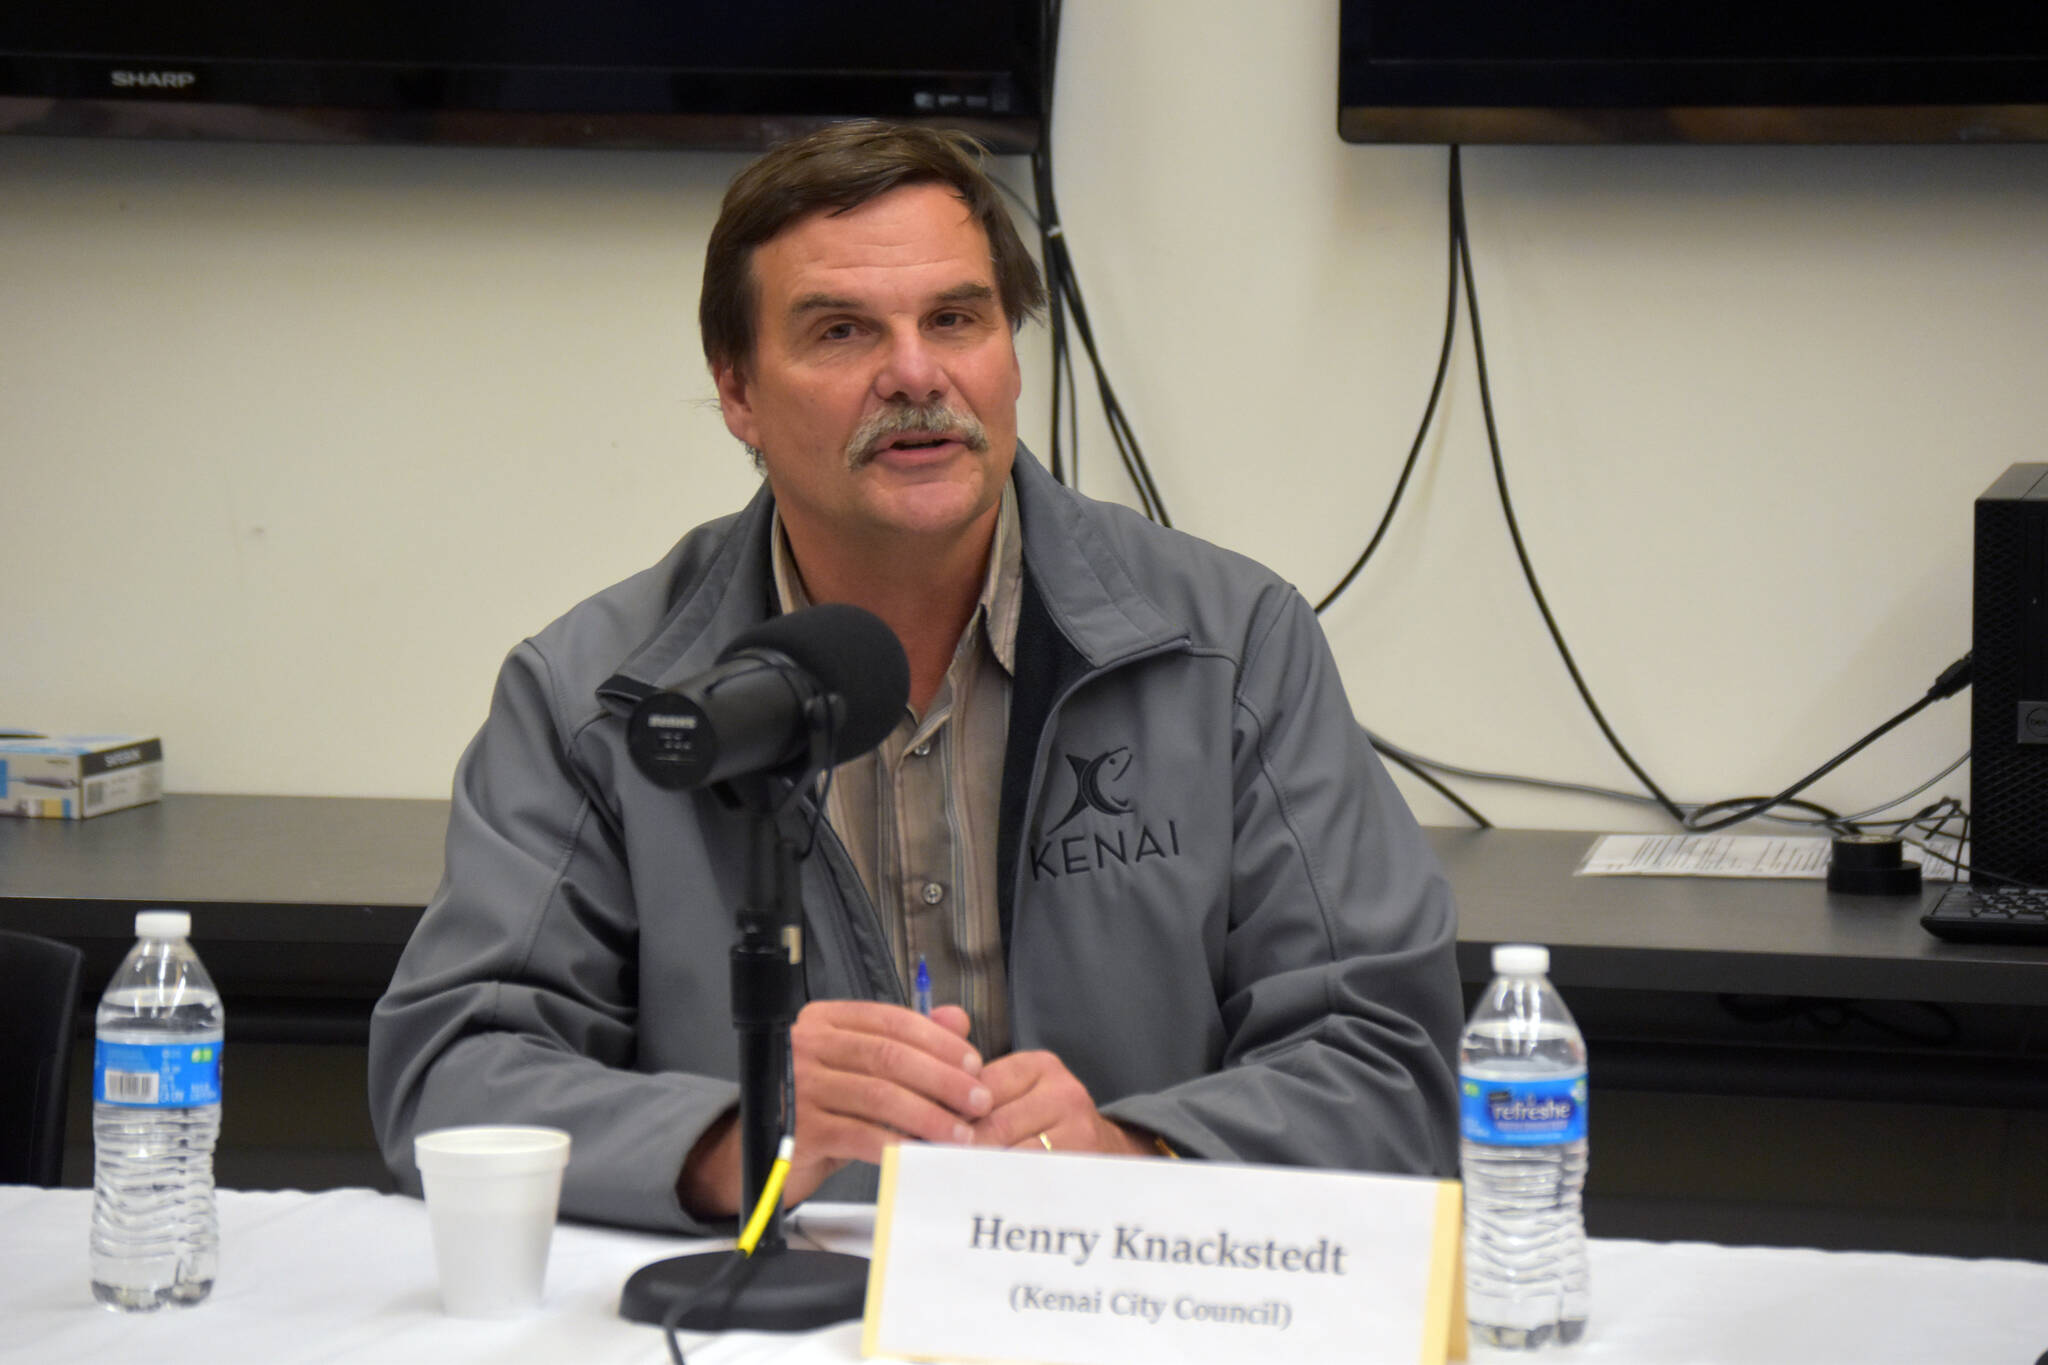 Henry Knackstedt participates in a Kenai City Council candidate forum at the Kenai Community Library in Kenai, Alaska, on Thursday, Sept. 7, 2023. (Jake Dye/Peninsula Clarion)